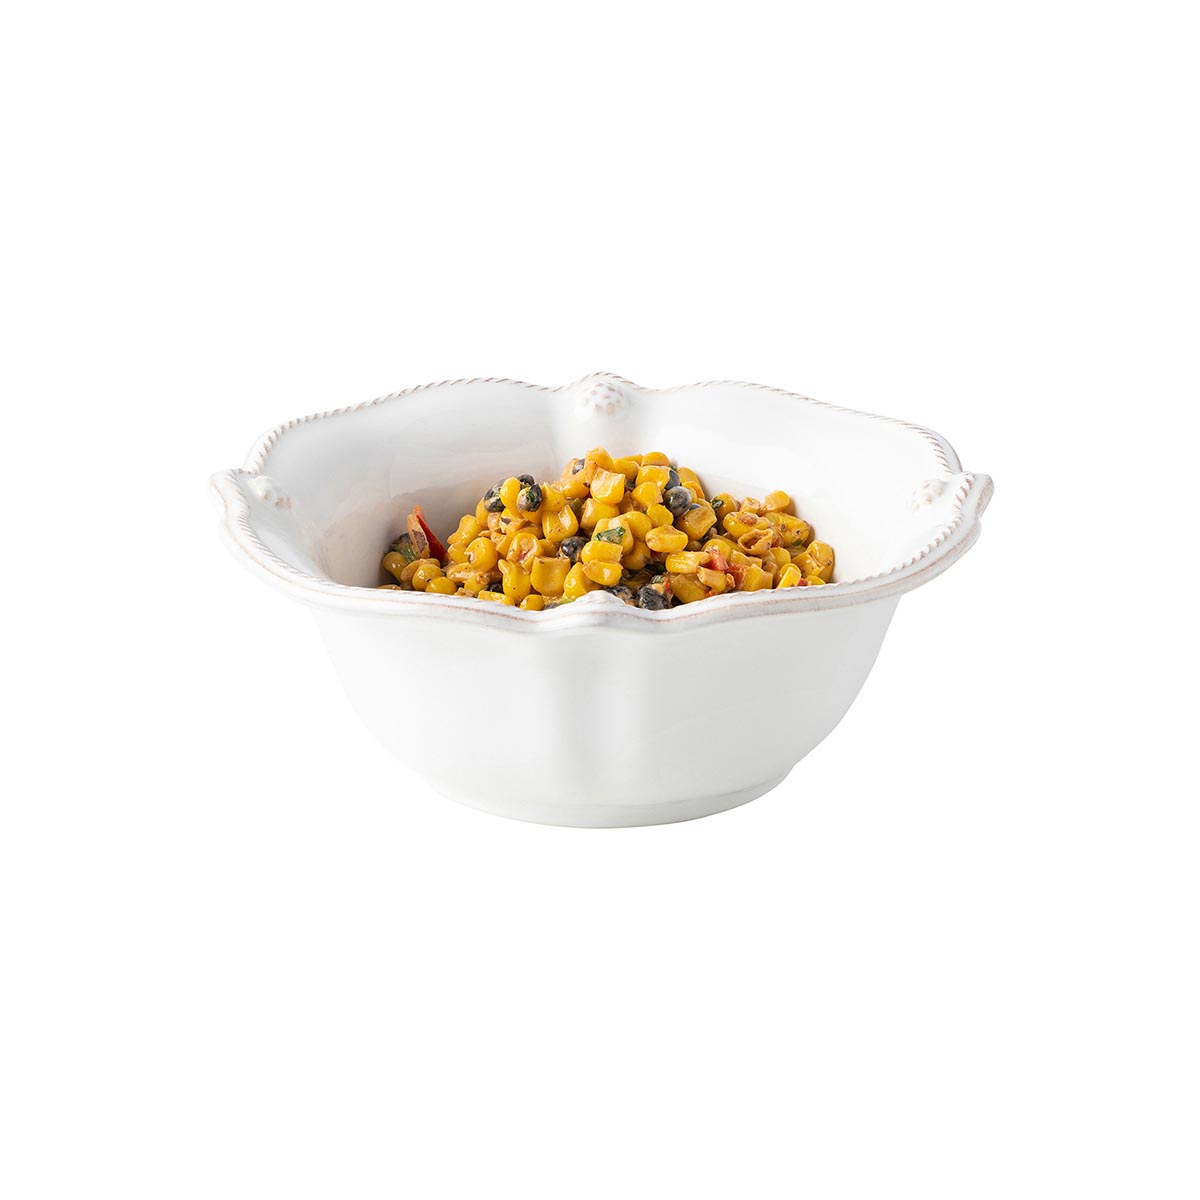 Berry & Thread Flared Cereal Bowl Set/4 - Whitewash | 2nd